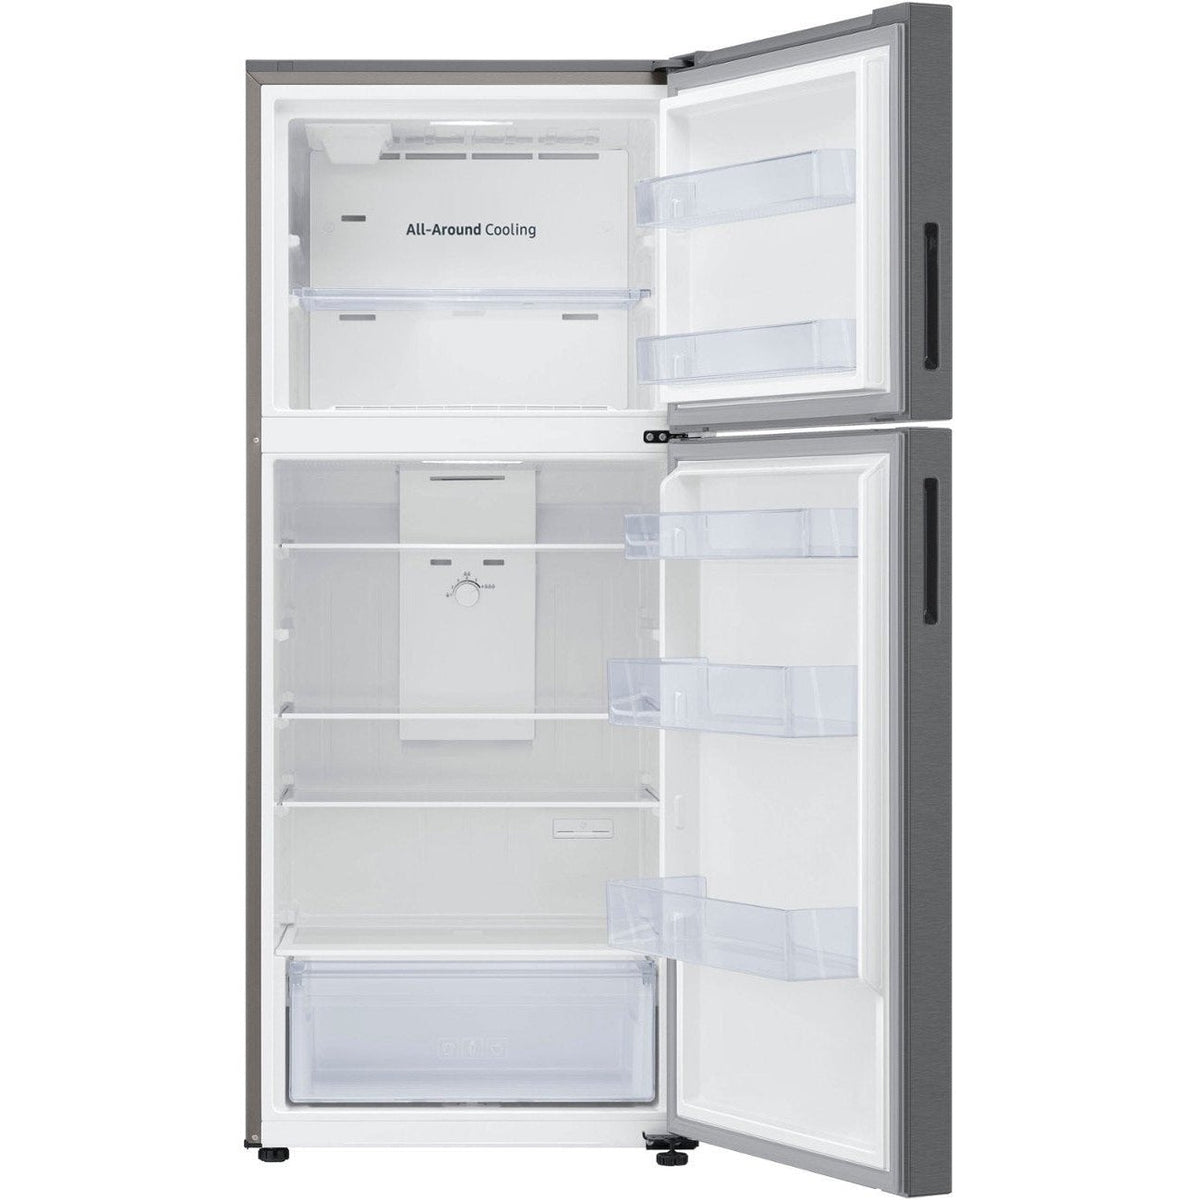 SAMSUNG RT16A6195SR/AA 15.6 cu. ft. Top Freezer Refrigerator in Stainless Steel